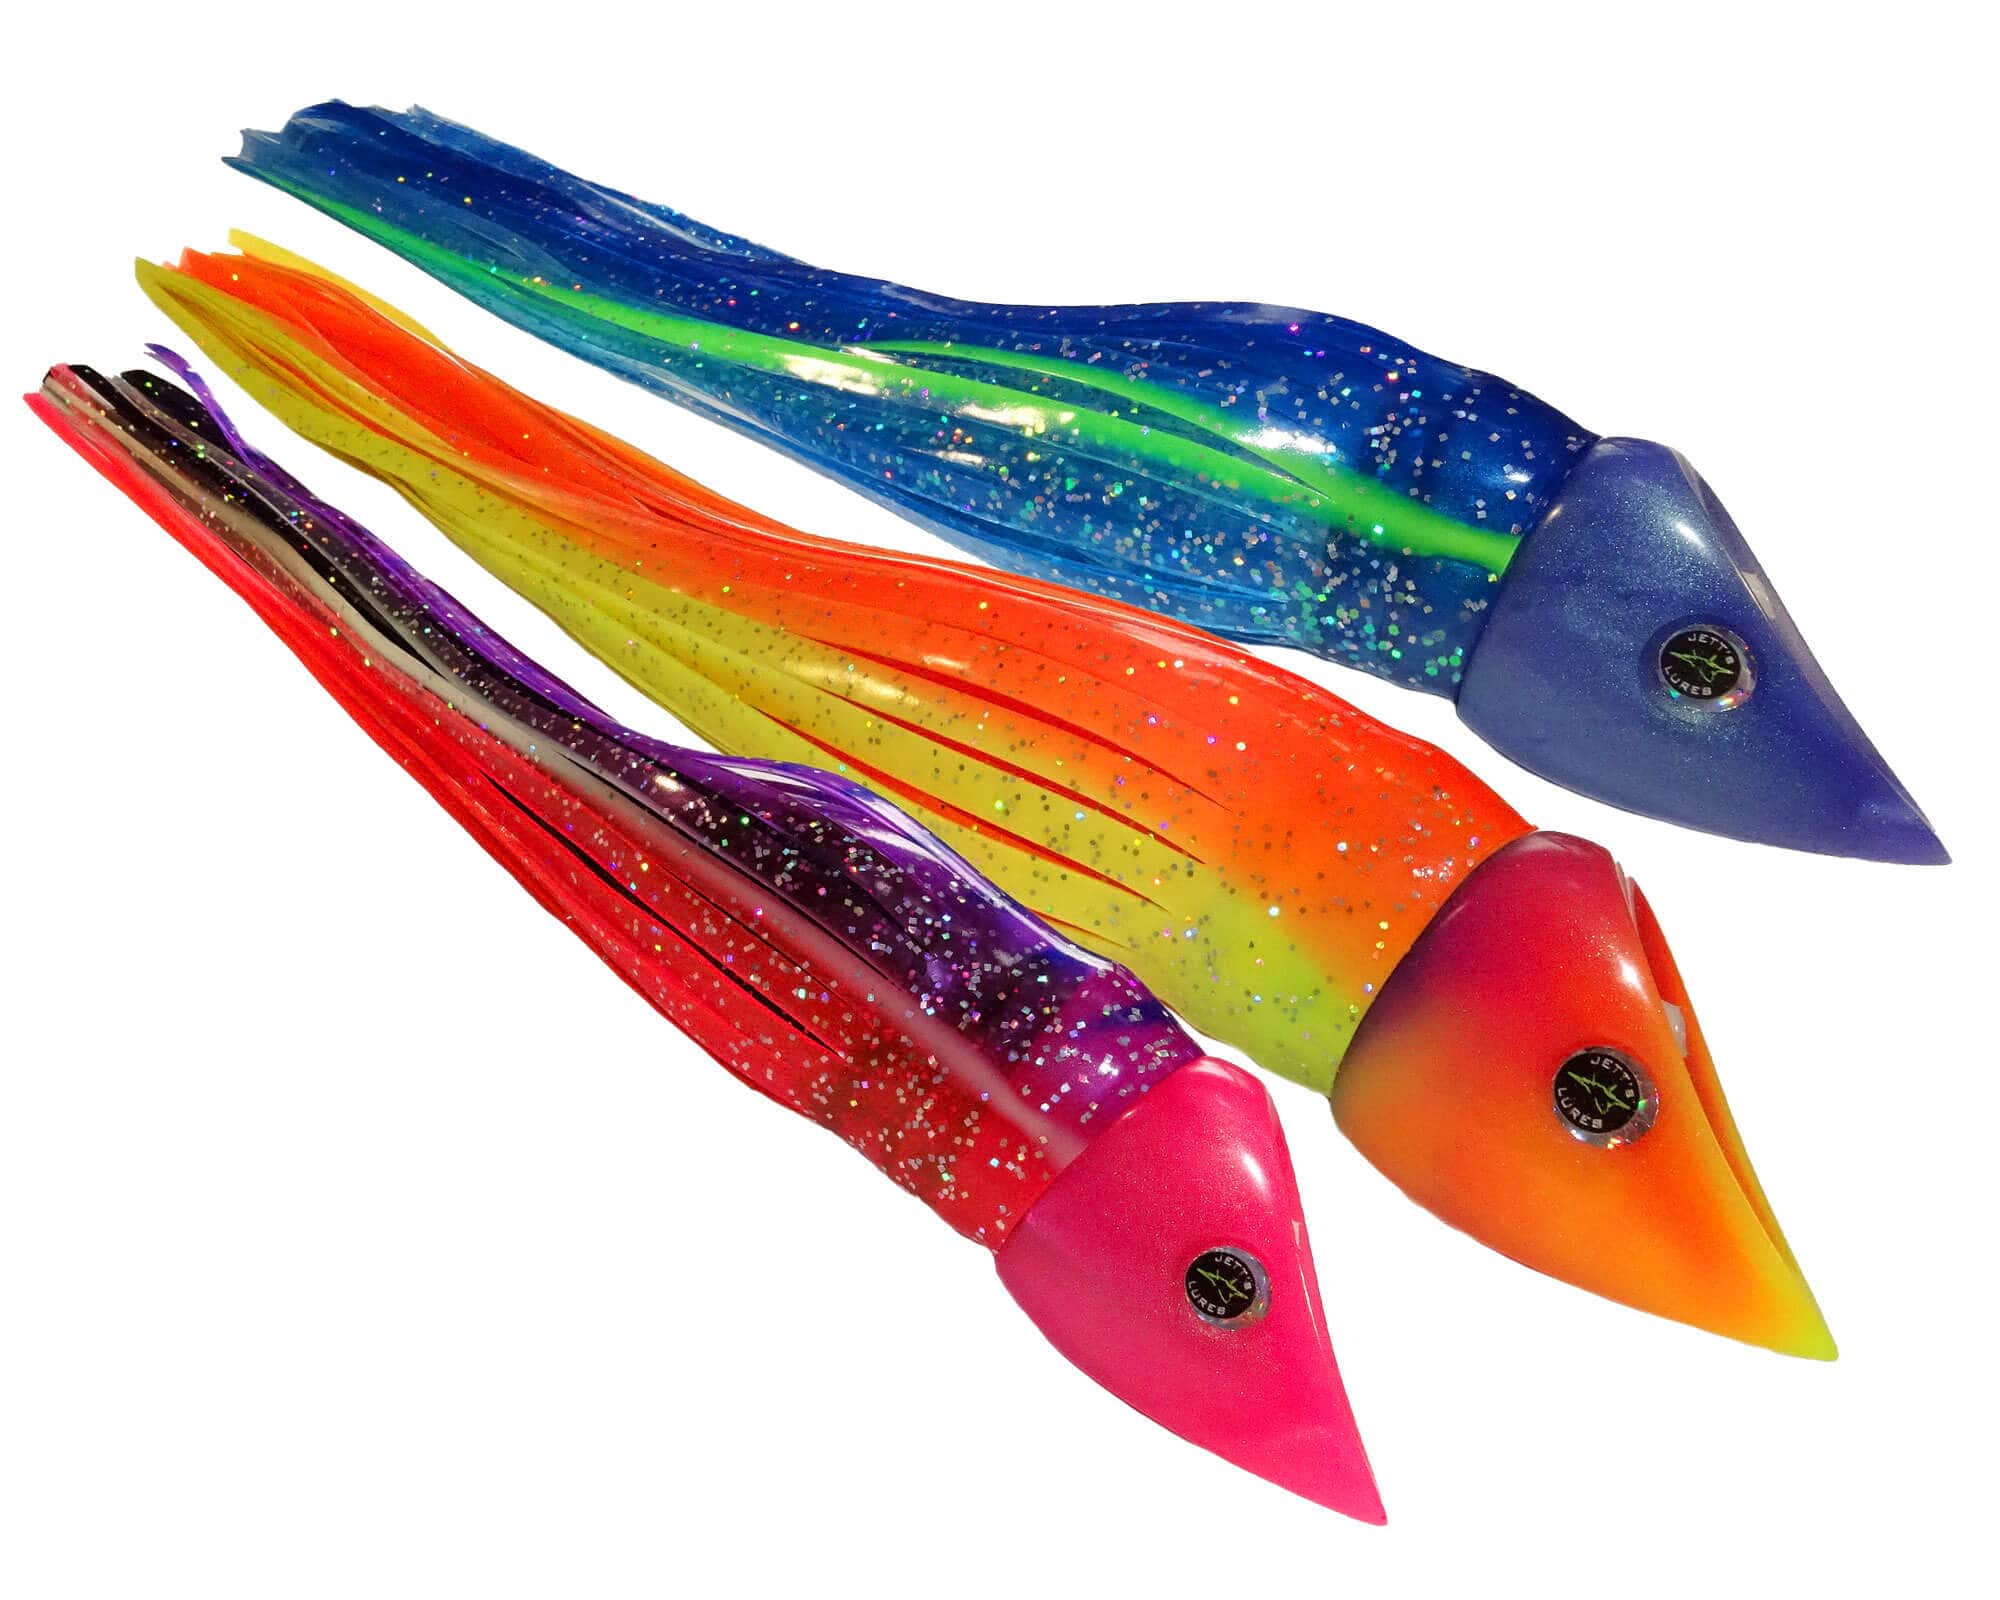 Jetts Lures - Wedgie Series - Deep Diving Skirted Lure!